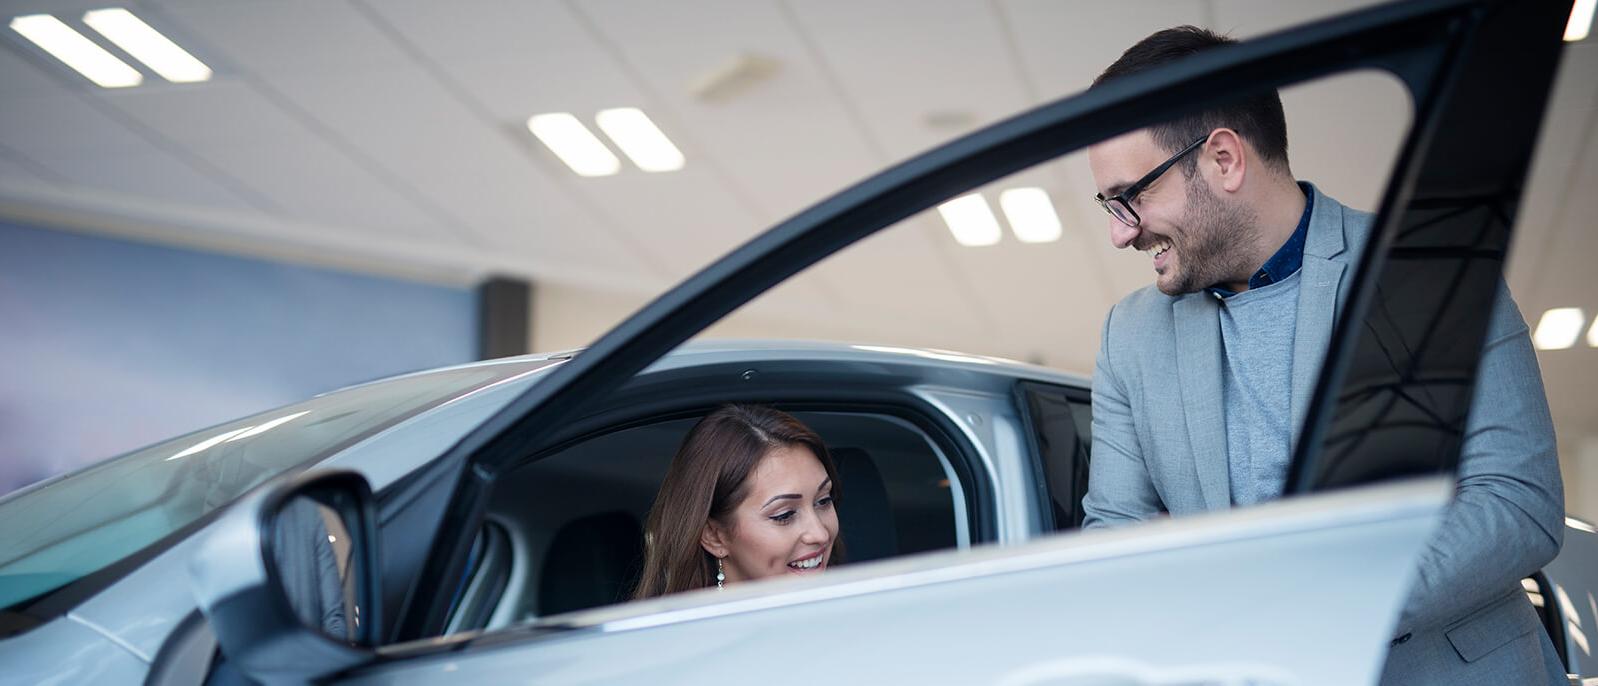 Dealership sales associate showing a customer a new vehicle